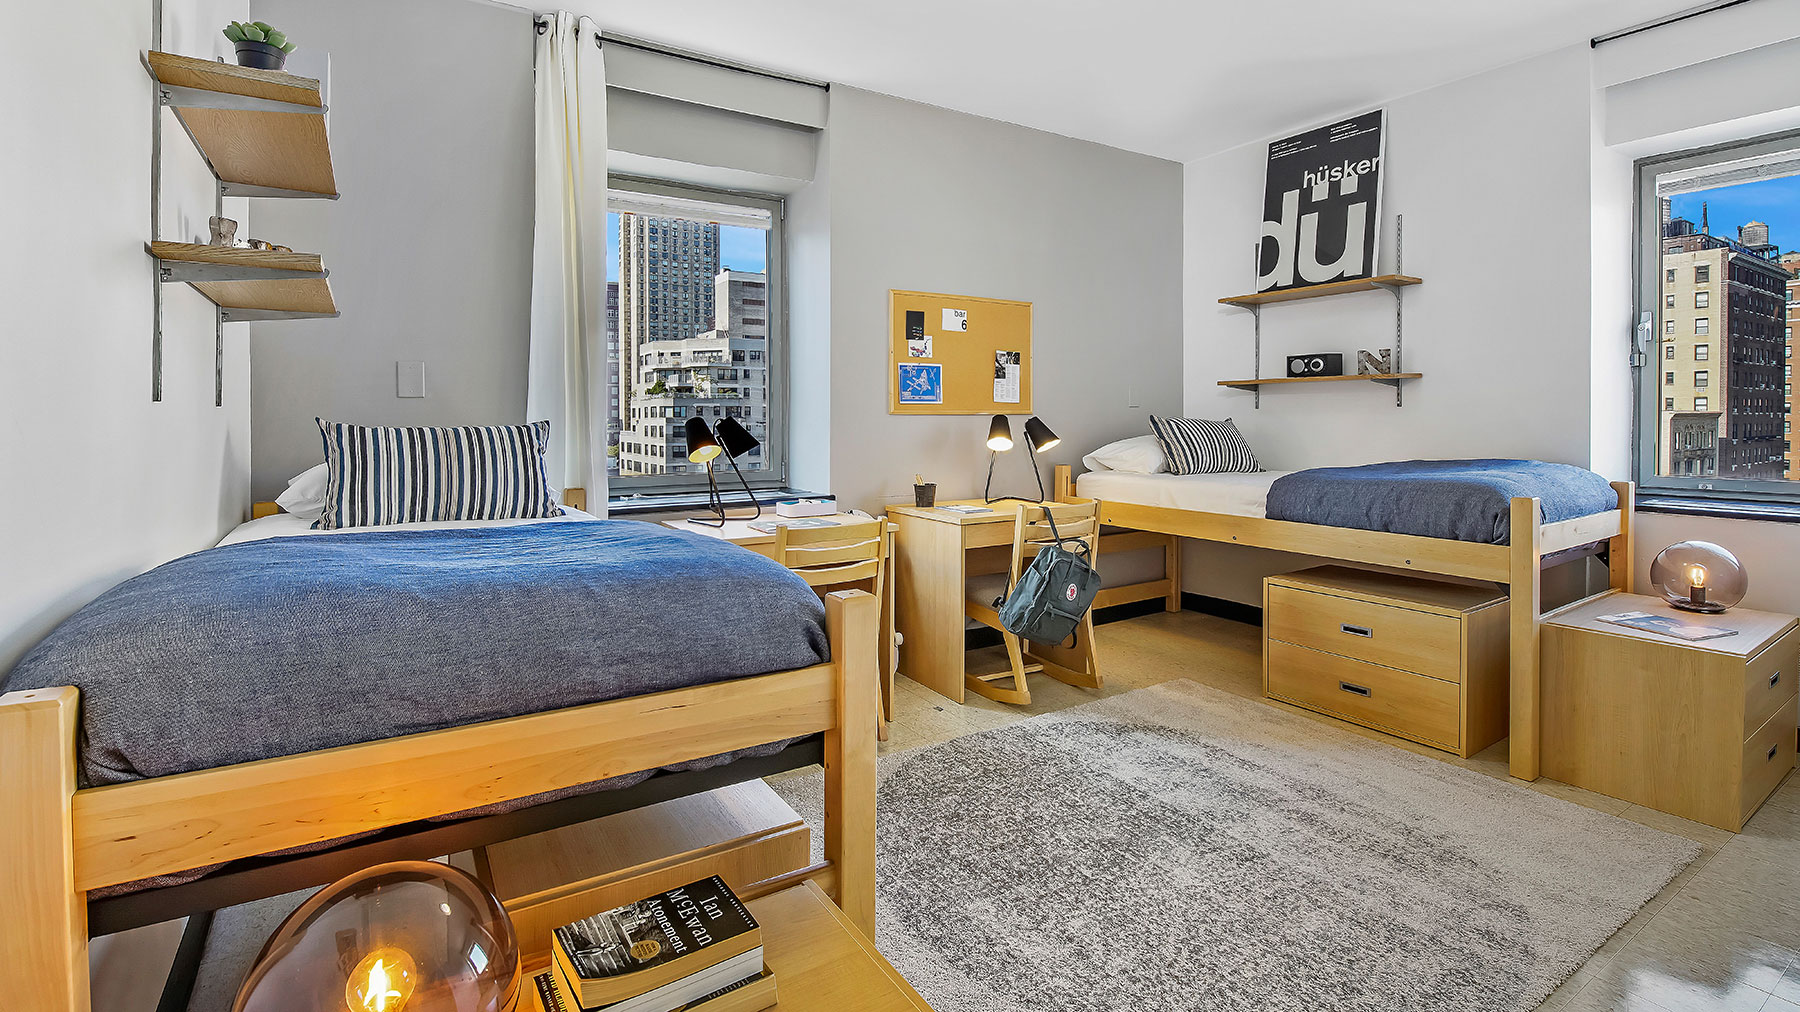 Rooms Rates 92y Residence 92y New York